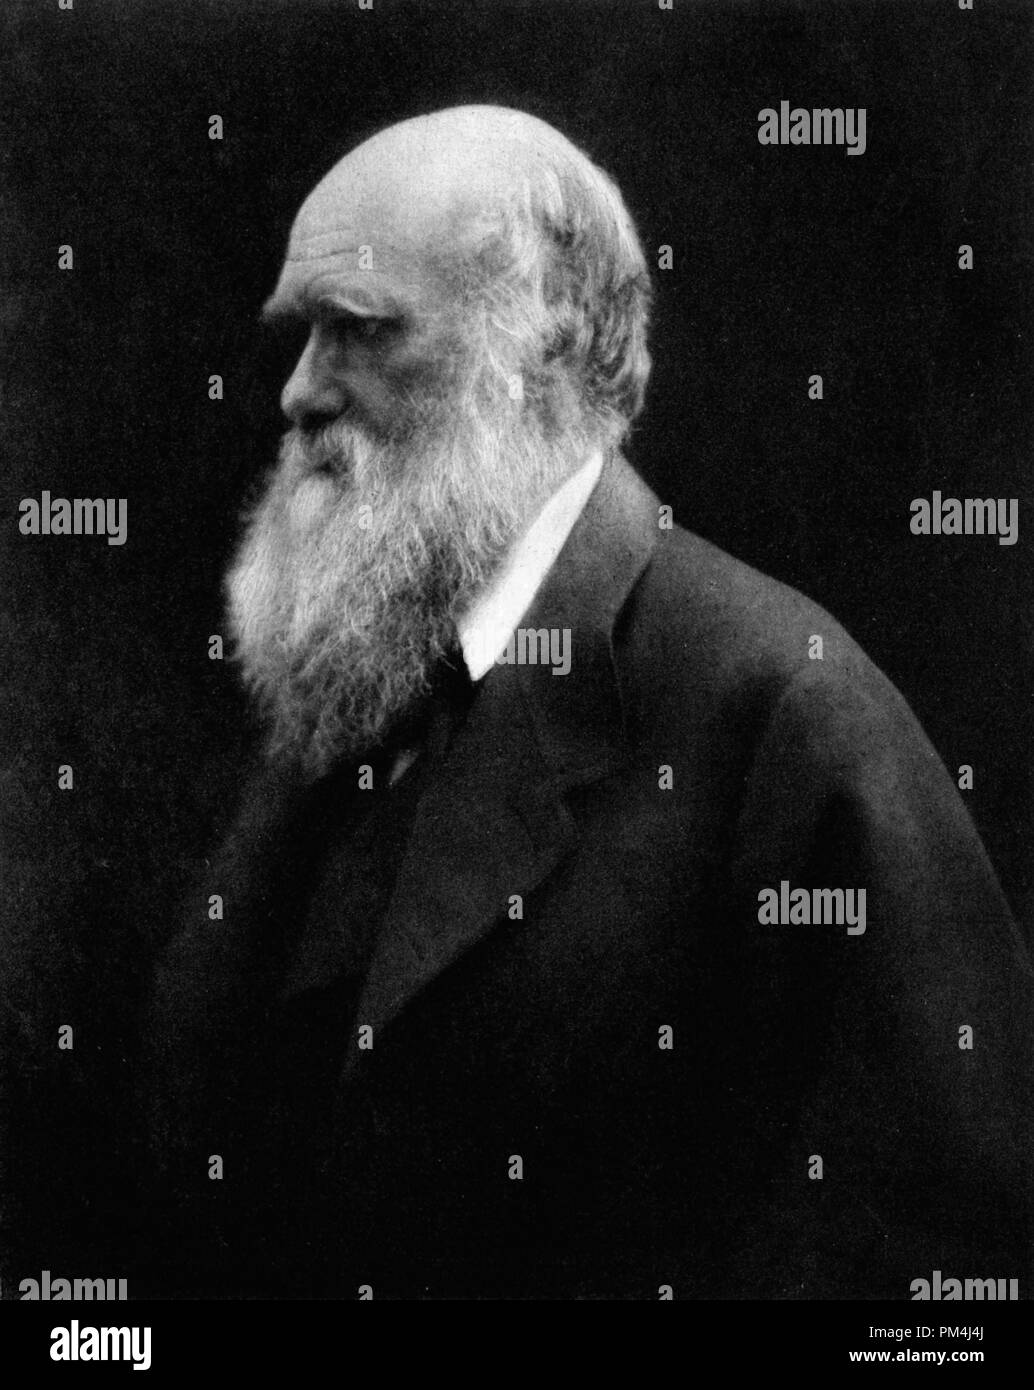 Charles Darwin, photographed by Julia Margaret Cameron 1868   File Reference # 1003 520THA Stock Photo